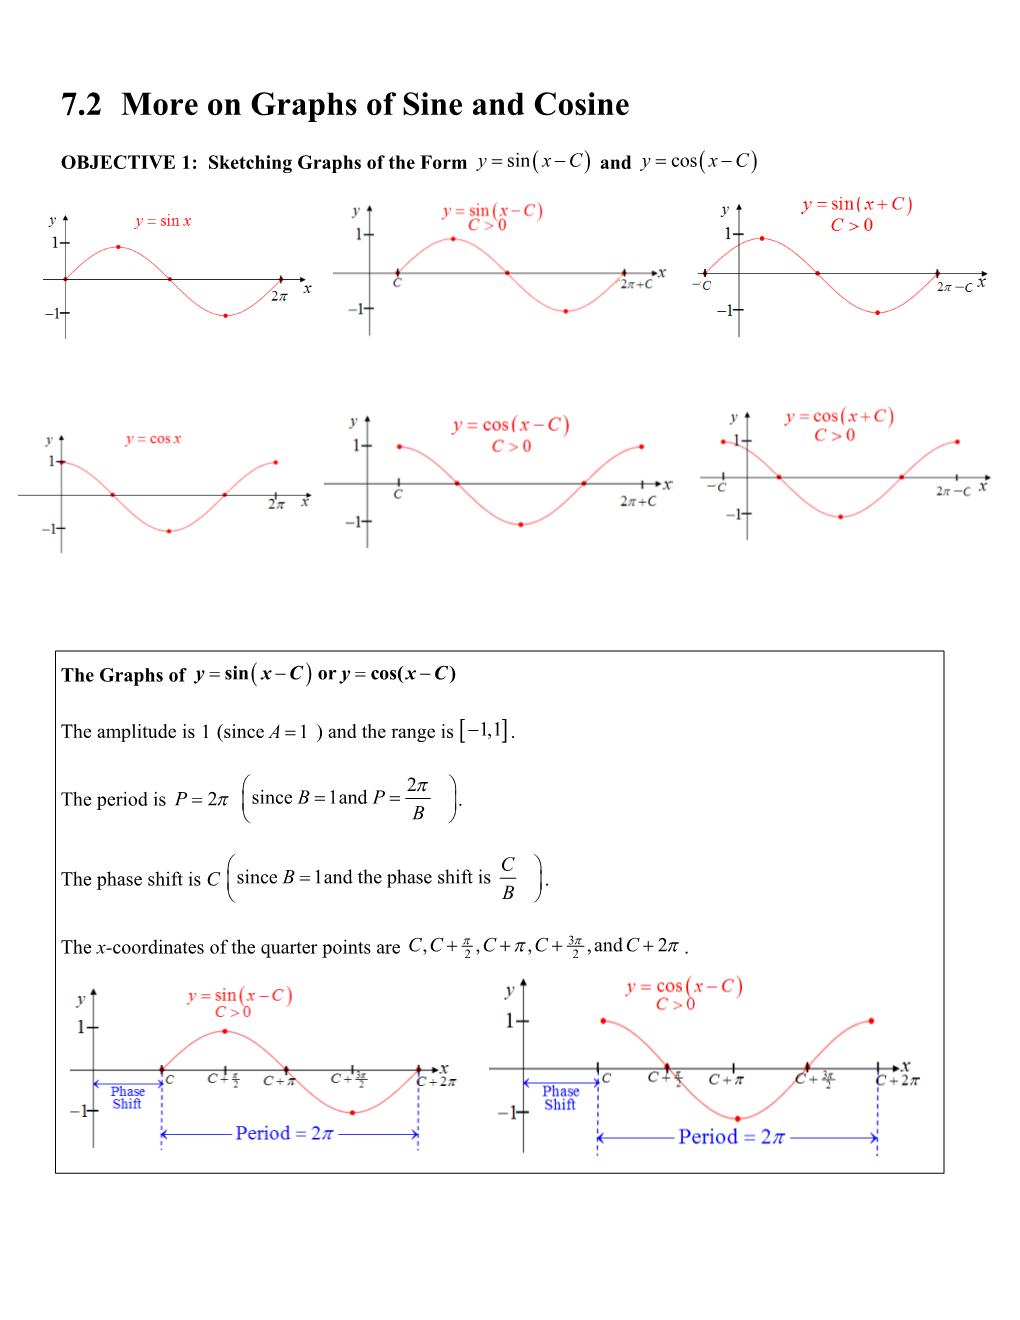 7.2More on Graphs of Sine and Cosine